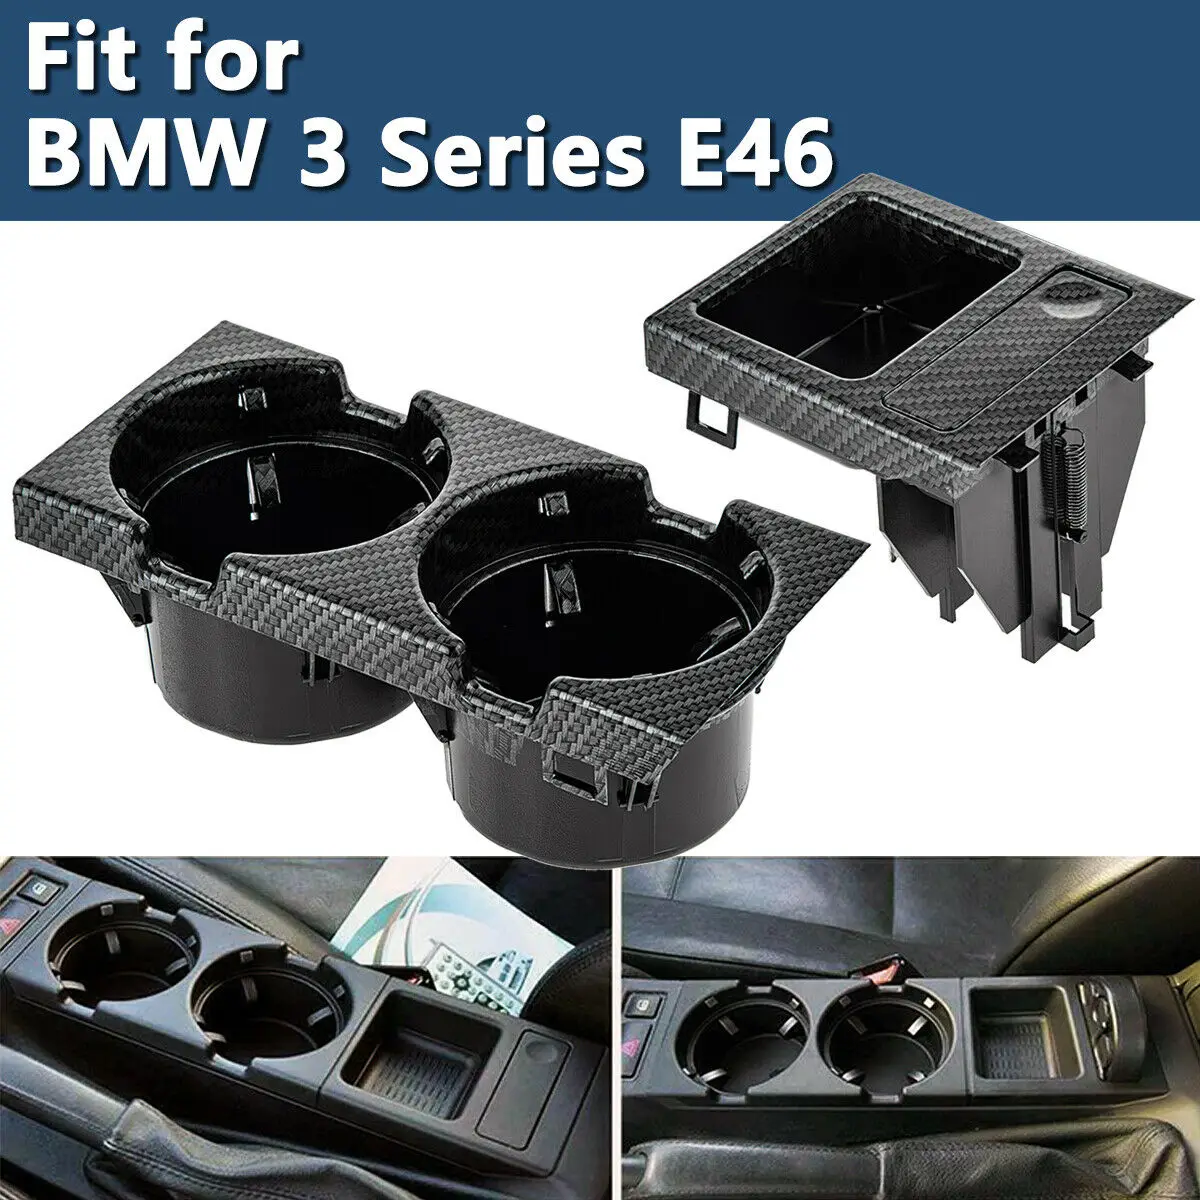 

Car Black Center Console Water Cup Holder Beverage Bottle Holder Coin Tray For BMW E46 3 Series 1999-2006 51168217953